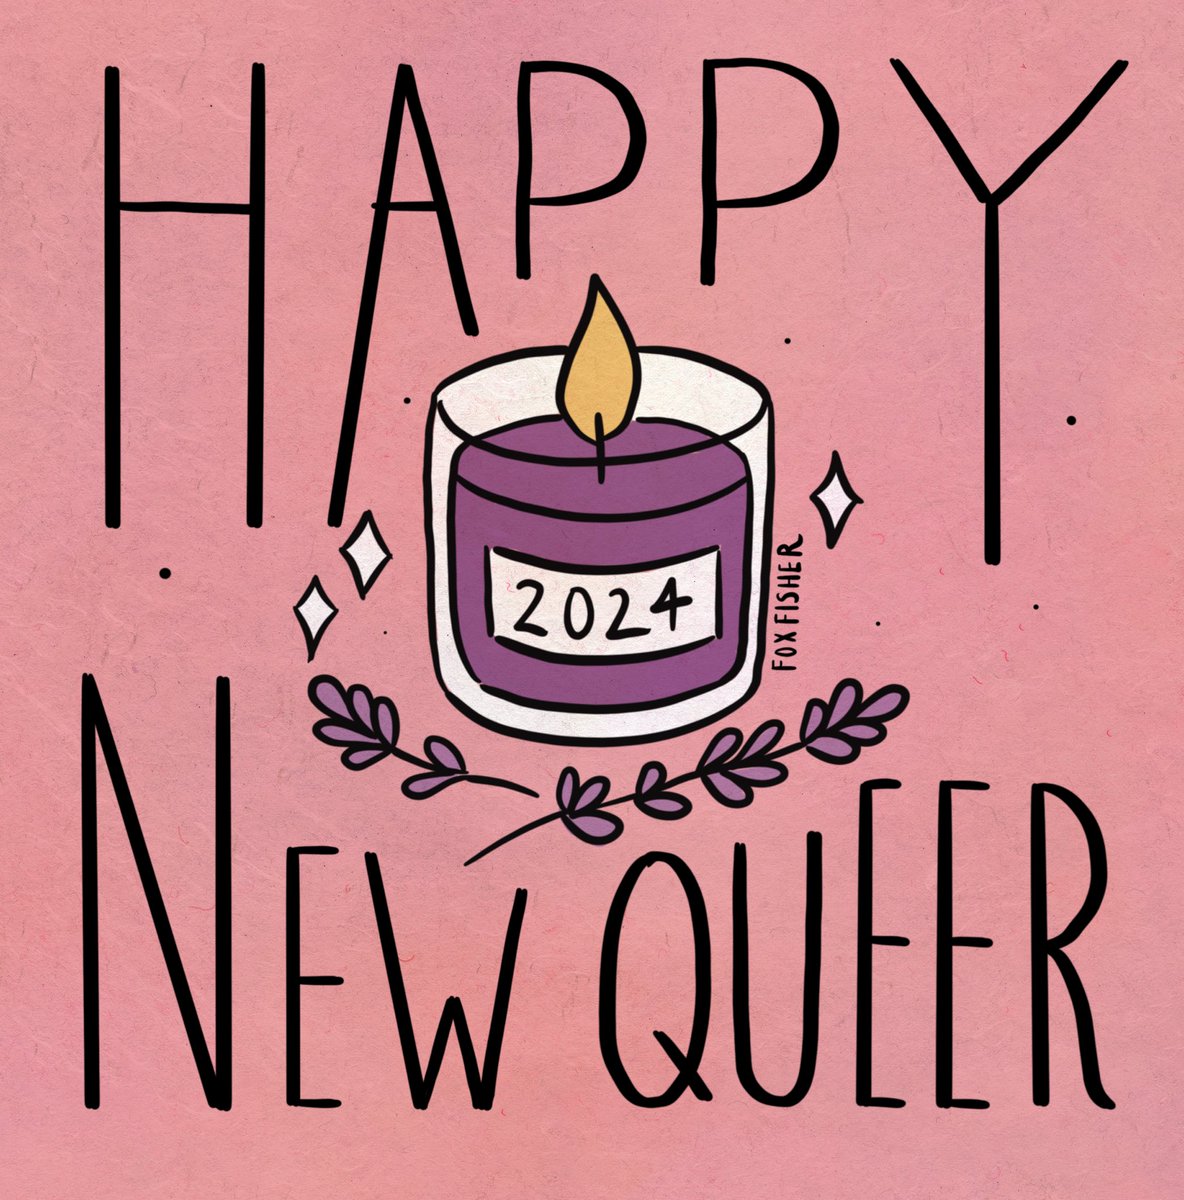 Happy 2024 🏳️‍⚧️✨🏳️‍🌈 I hope you can find peace in yourself, draw a line over 2023 and enter 2024 with hope and enthusiasm. #trans #queer #LGBTQIA #2024